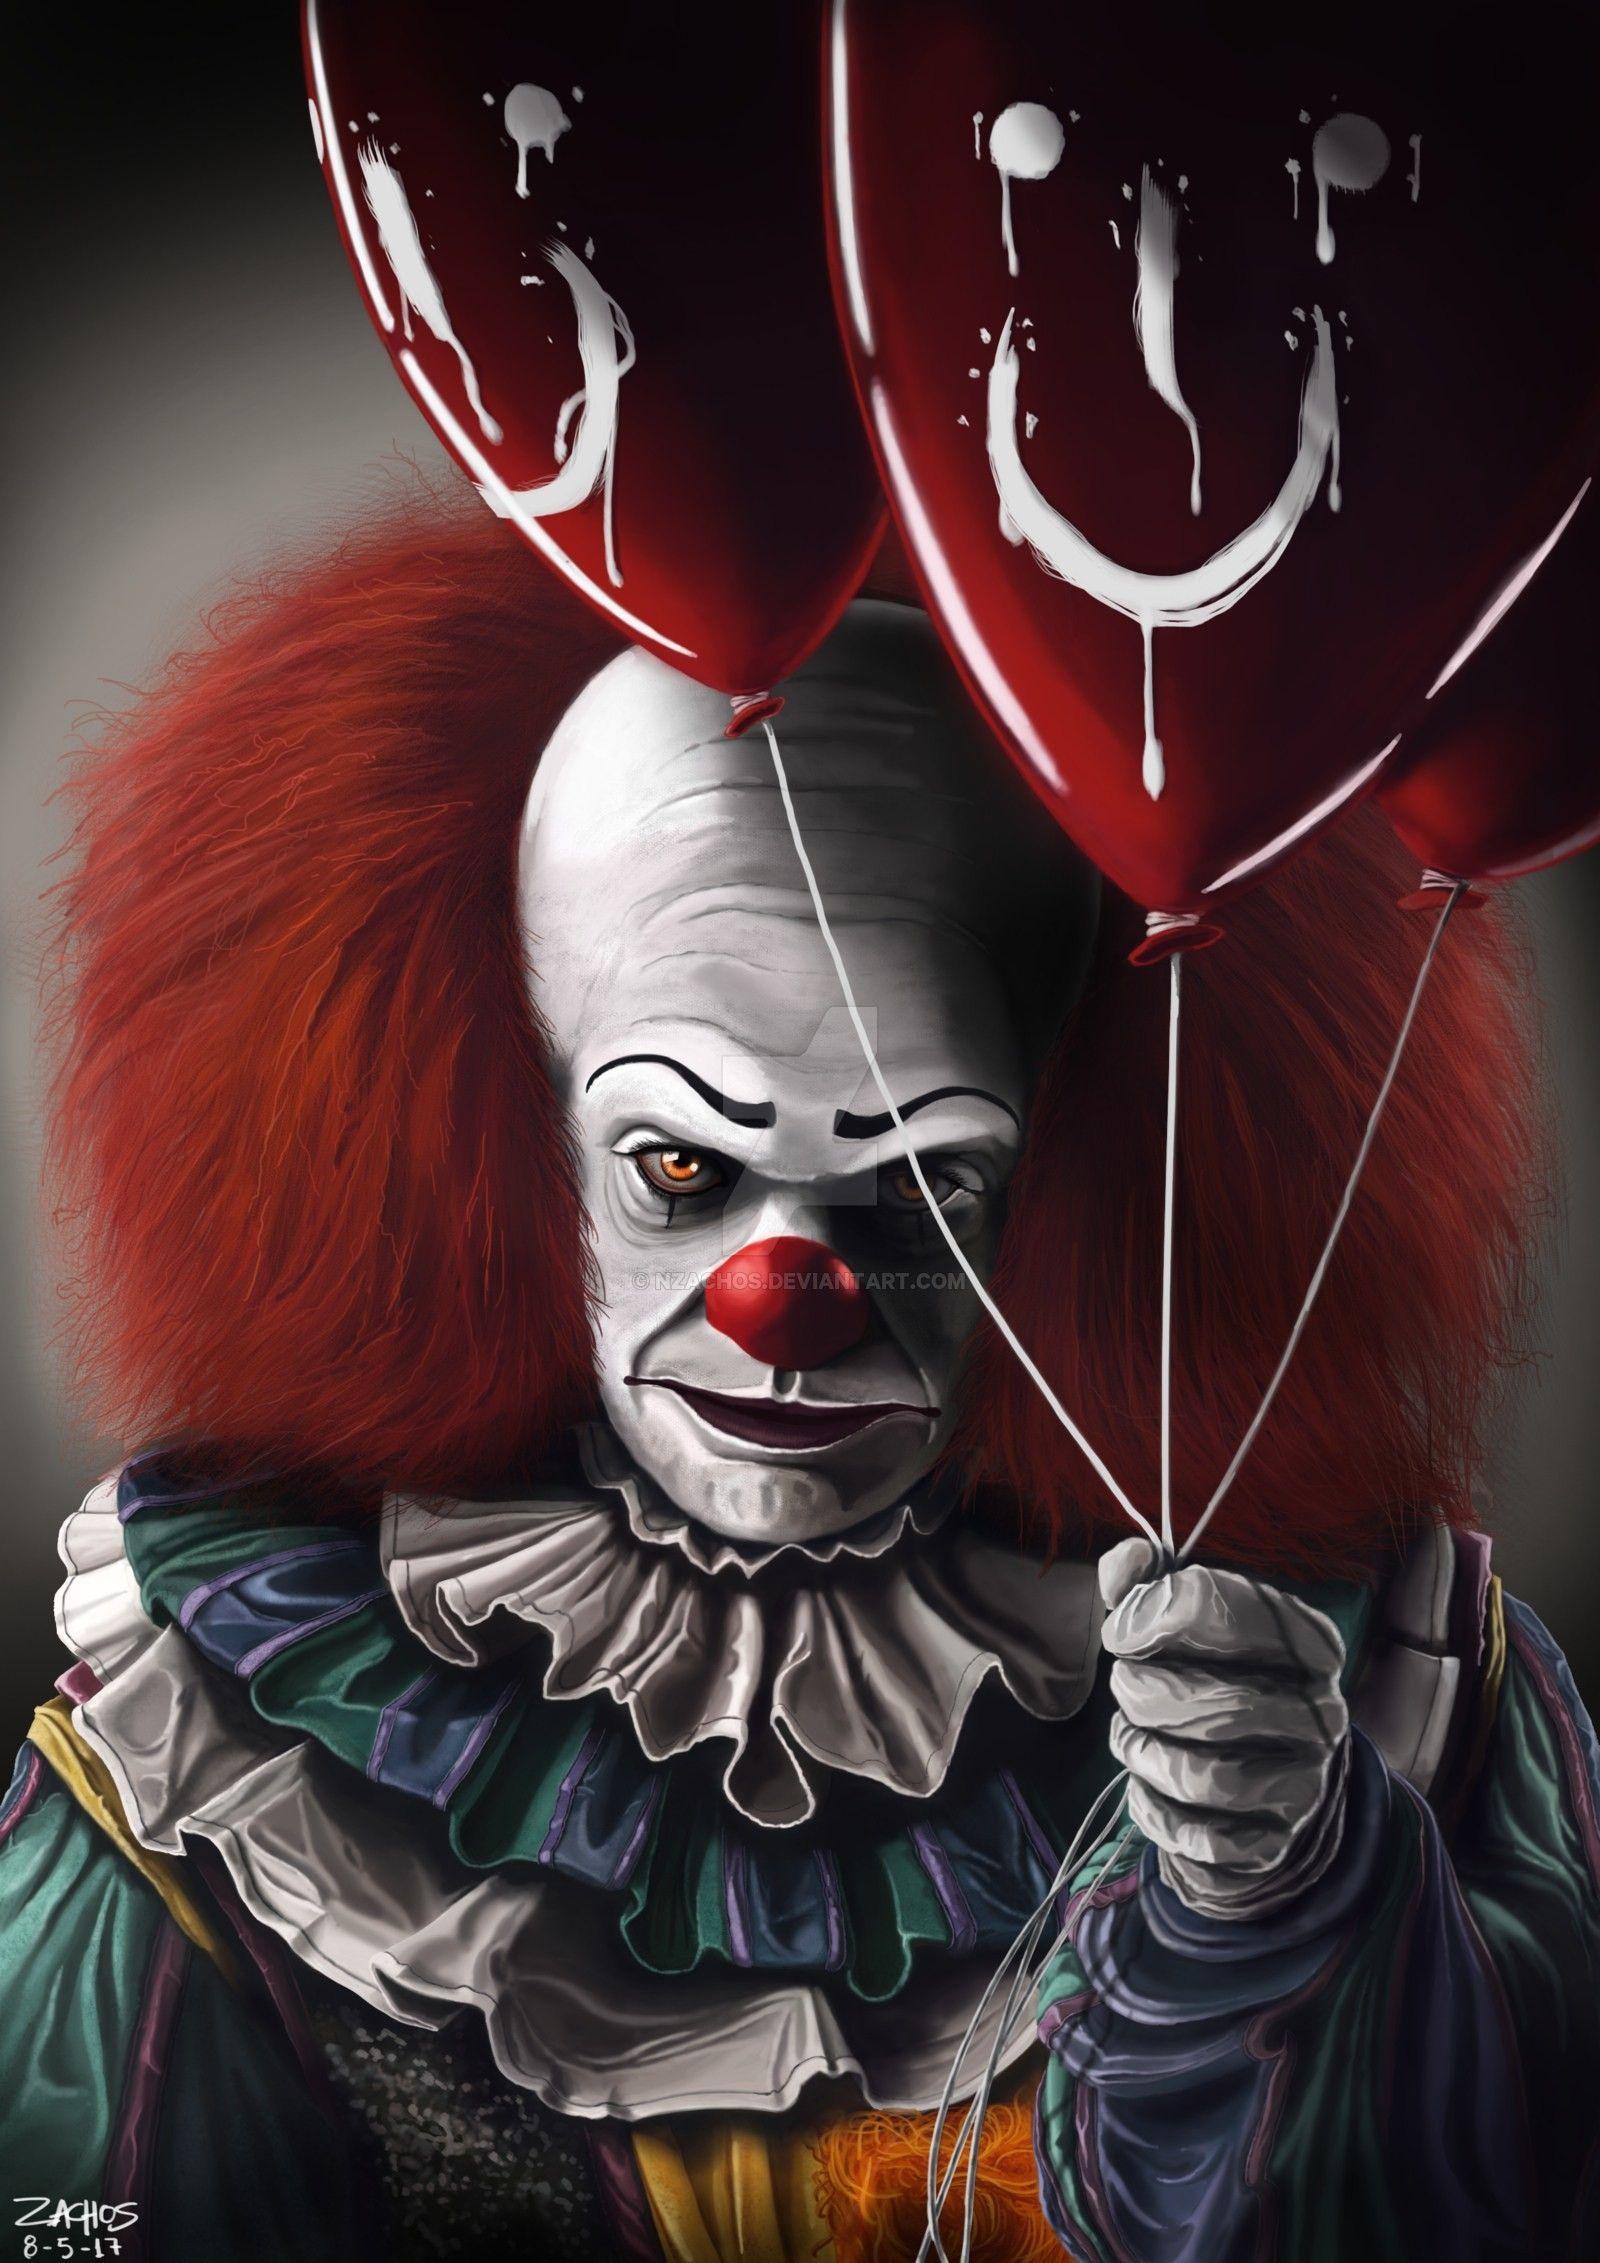 Free Pennywise Wallpaper Downloads 100 Pennywise Wallpapers for FREE   Wallpaperscom